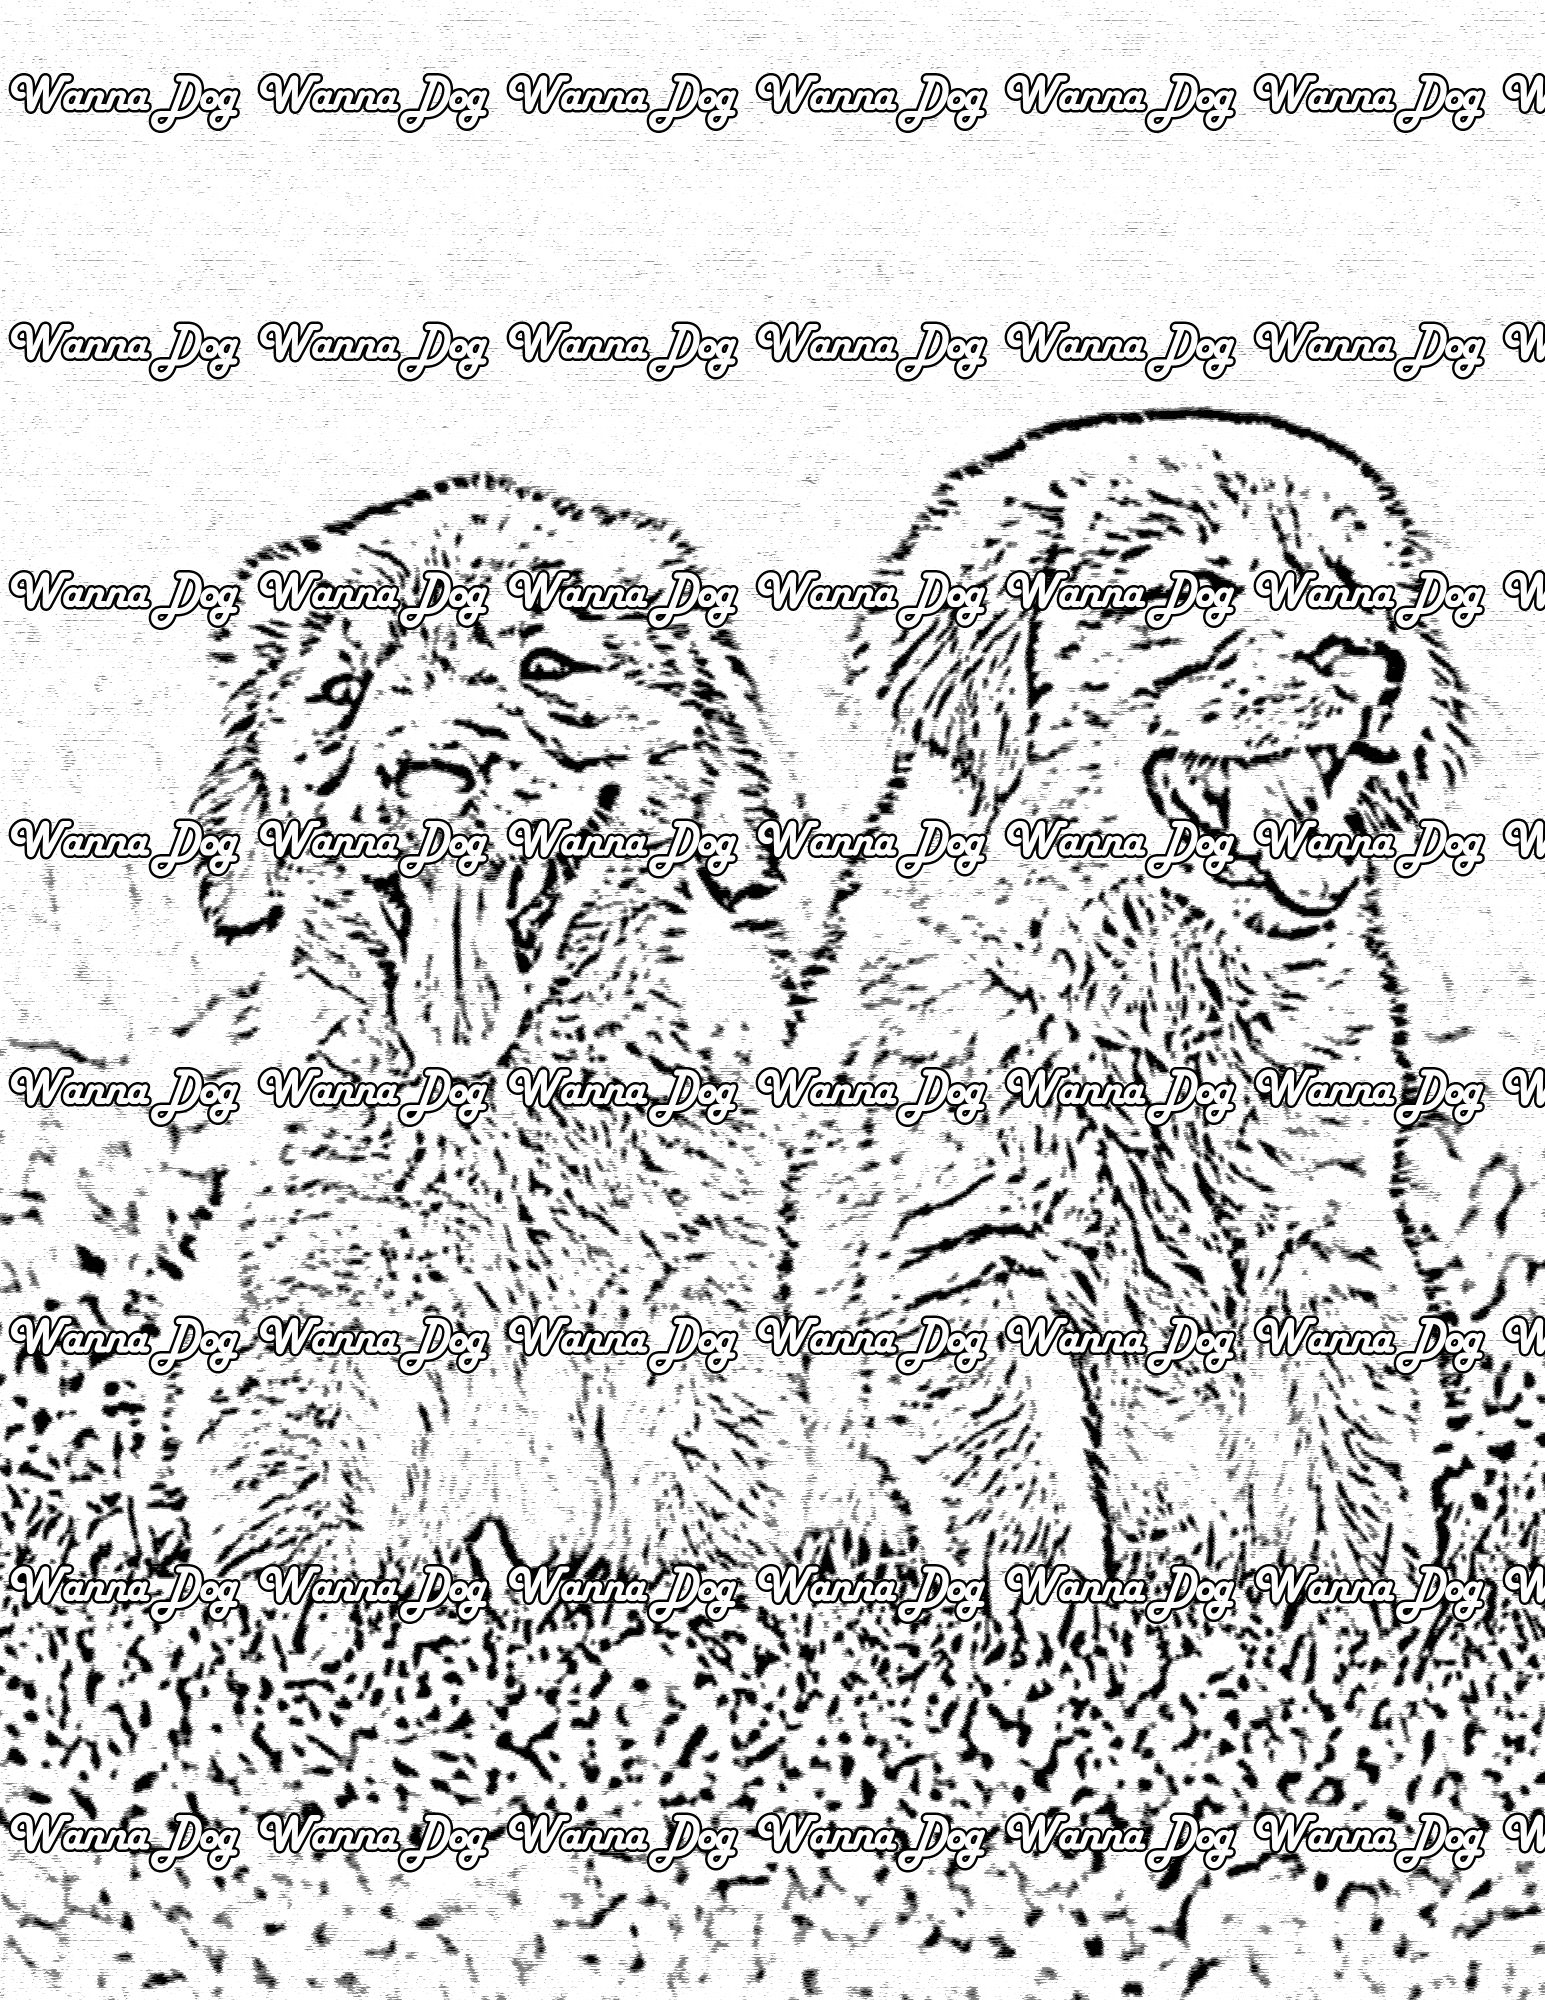 Golden Retriever Coloring Page of 2 Golden Retrievers in a field 